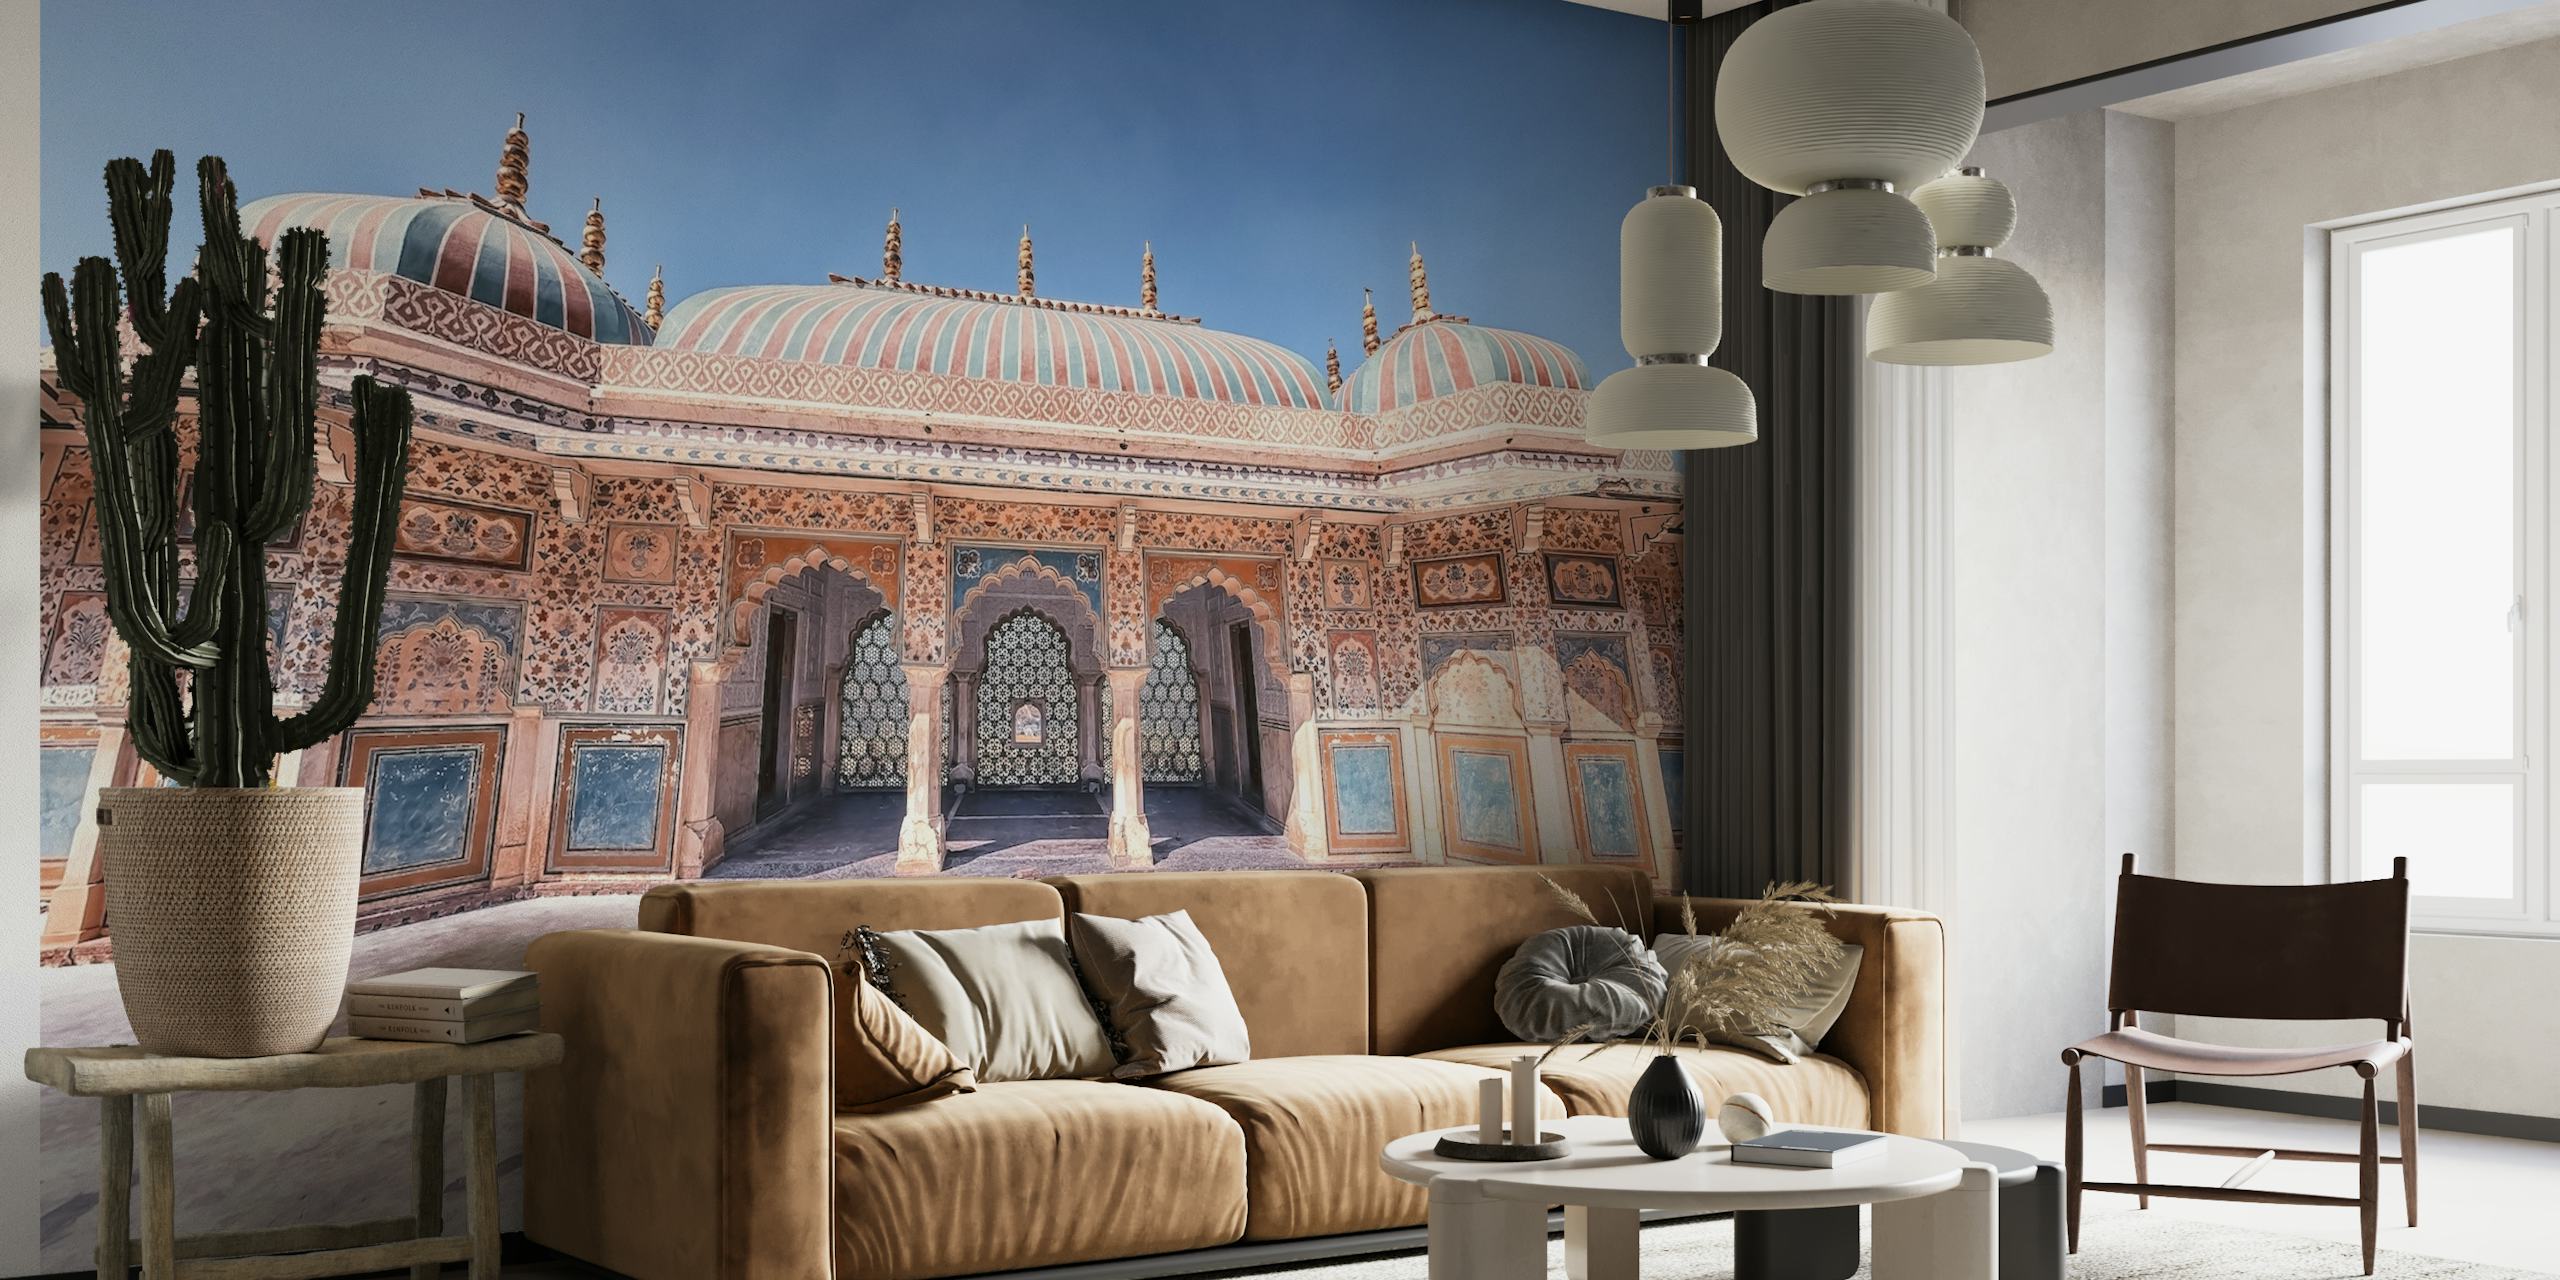 Amber Fort wall mural depicting the majestic Indian architecture and intricate palace details